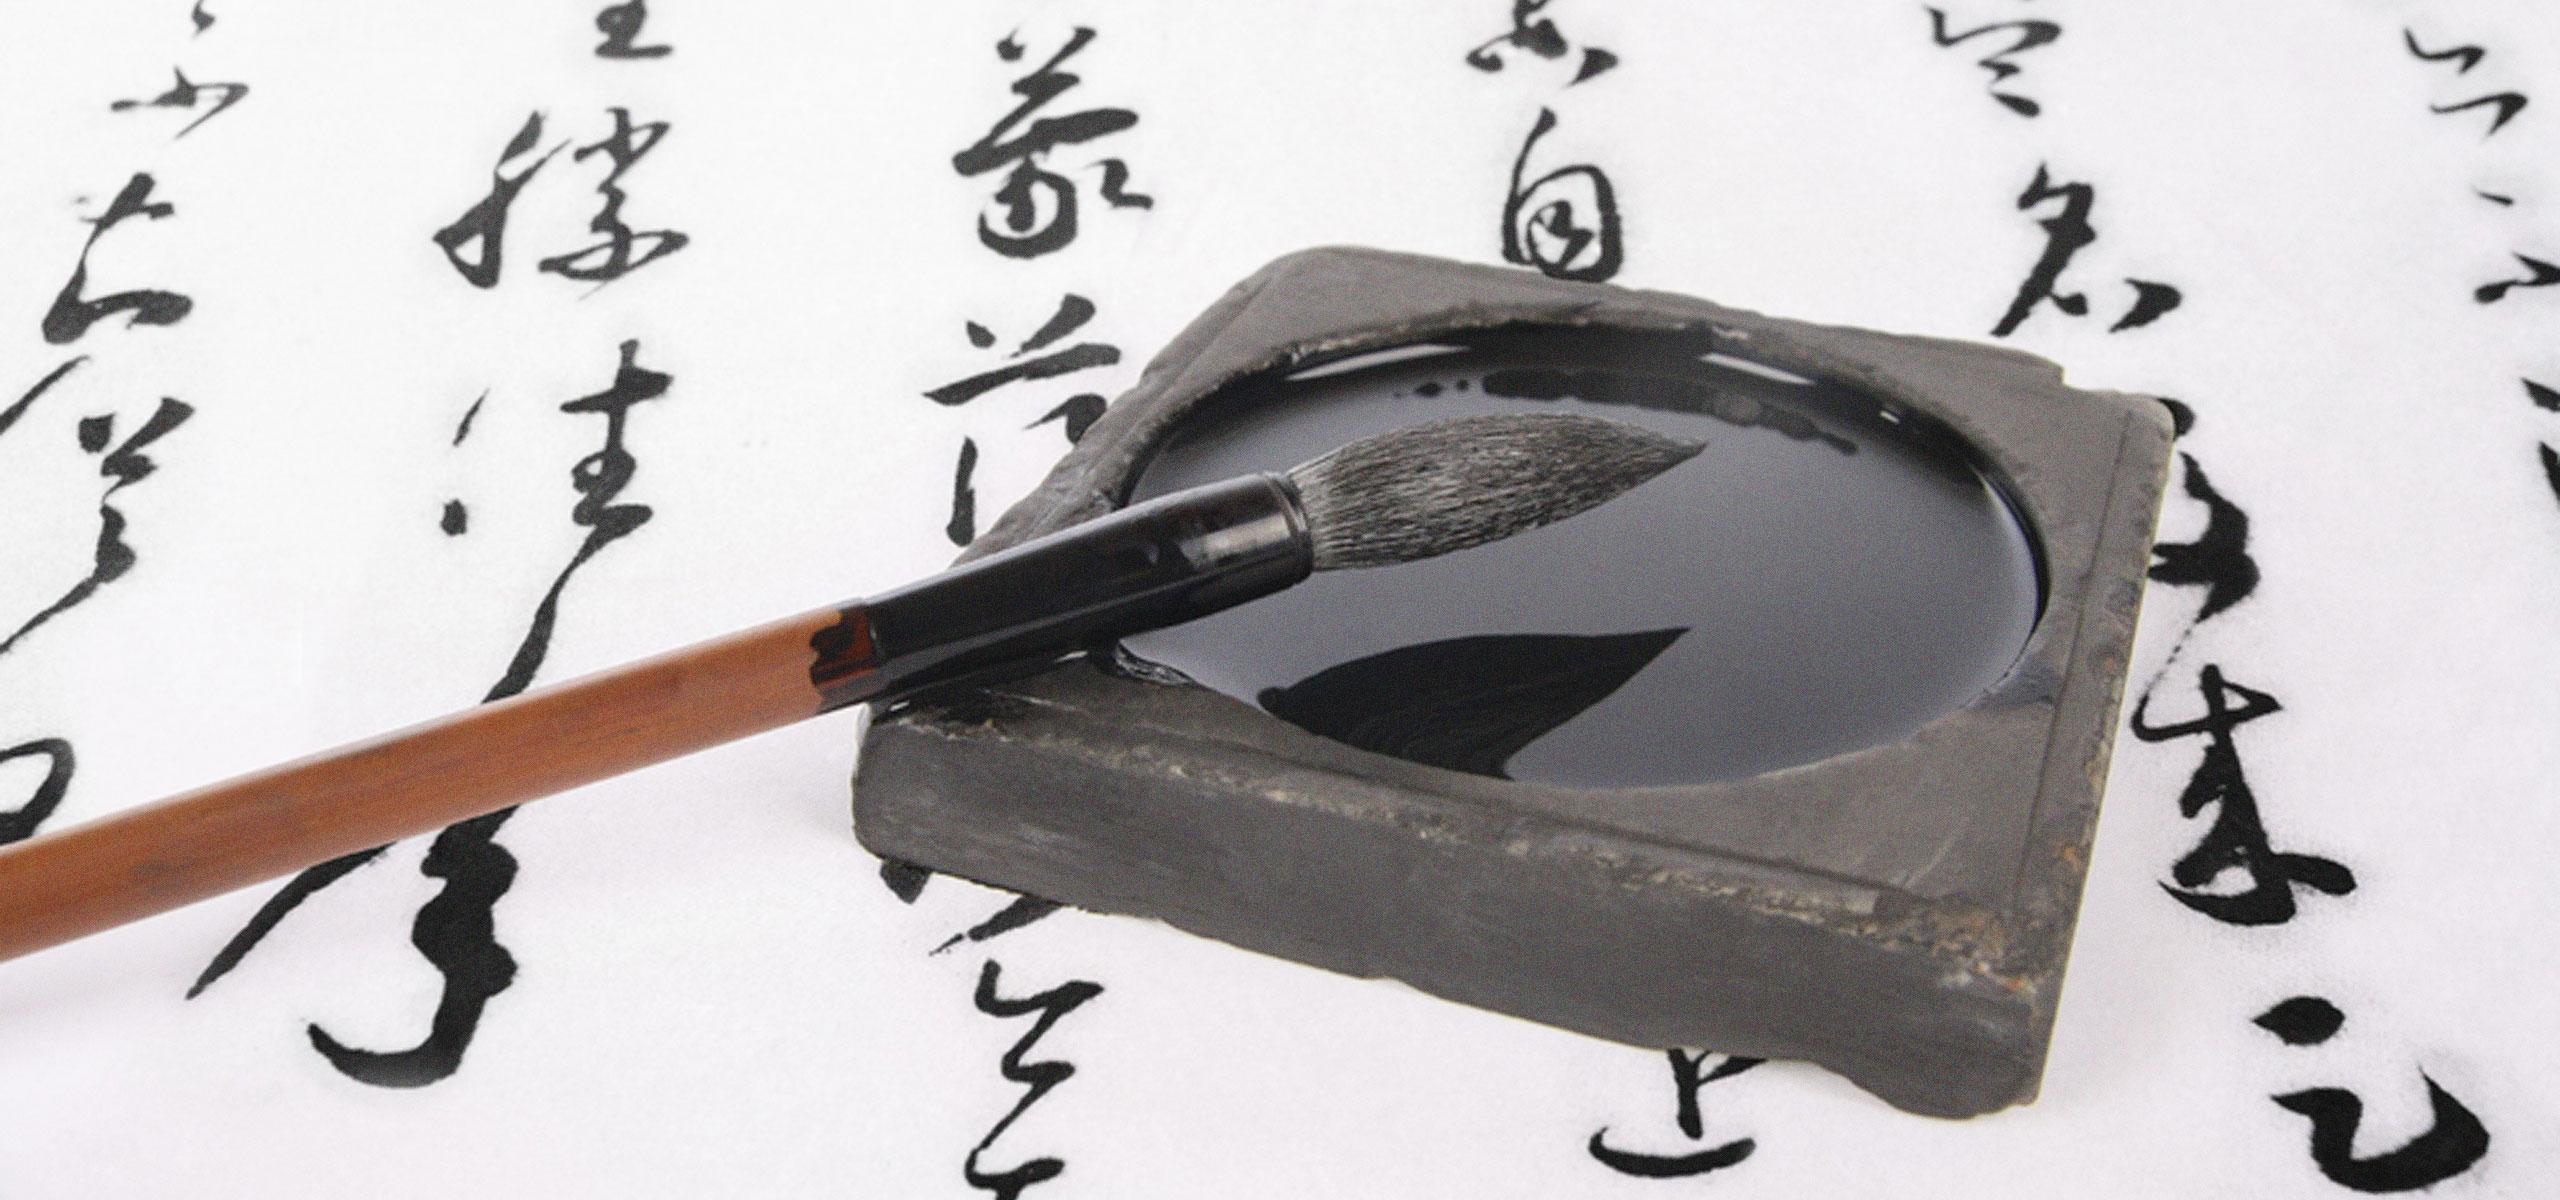 A bursh and ink on top of a piece of paper with Chinese calligraphy